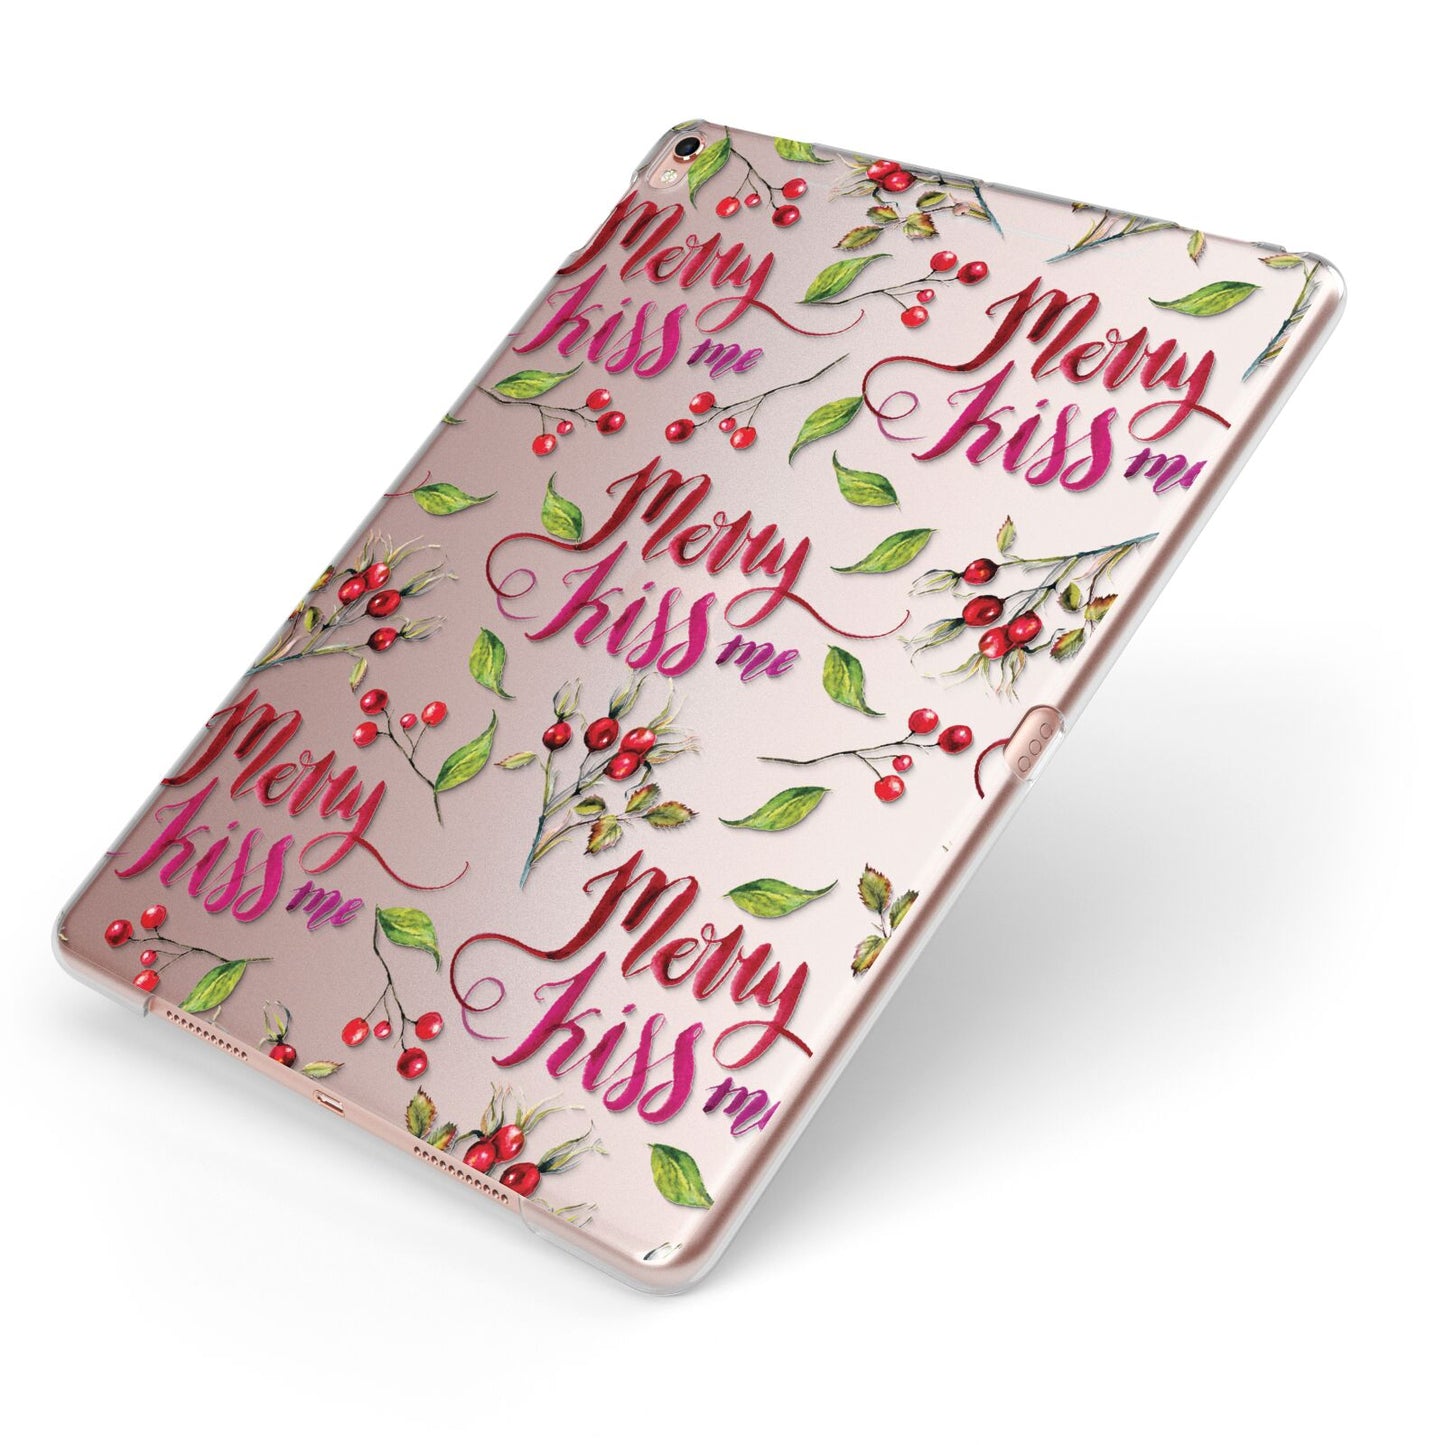 Merry kiss me Apple iPad Case on Rose Gold iPad Side View